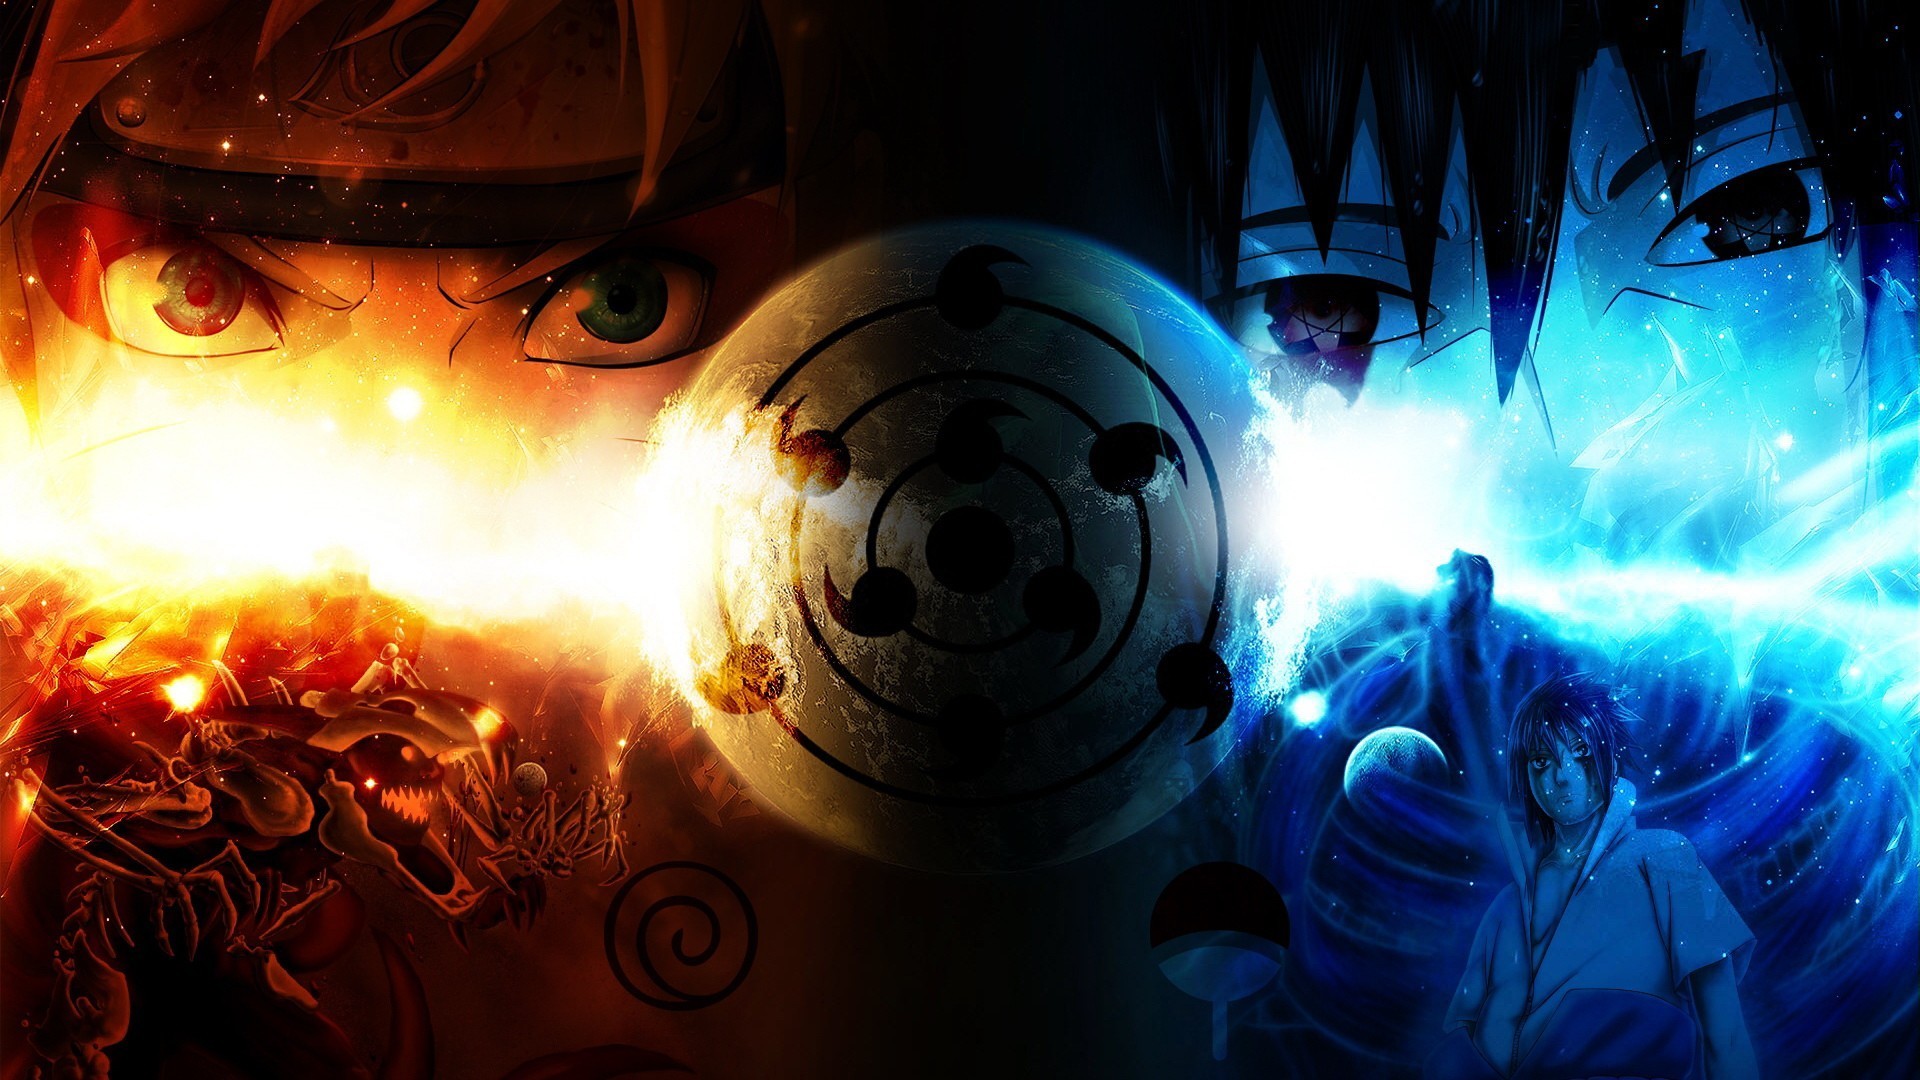  Naruto  wallpaper    Download free awesome backgrounds  for 